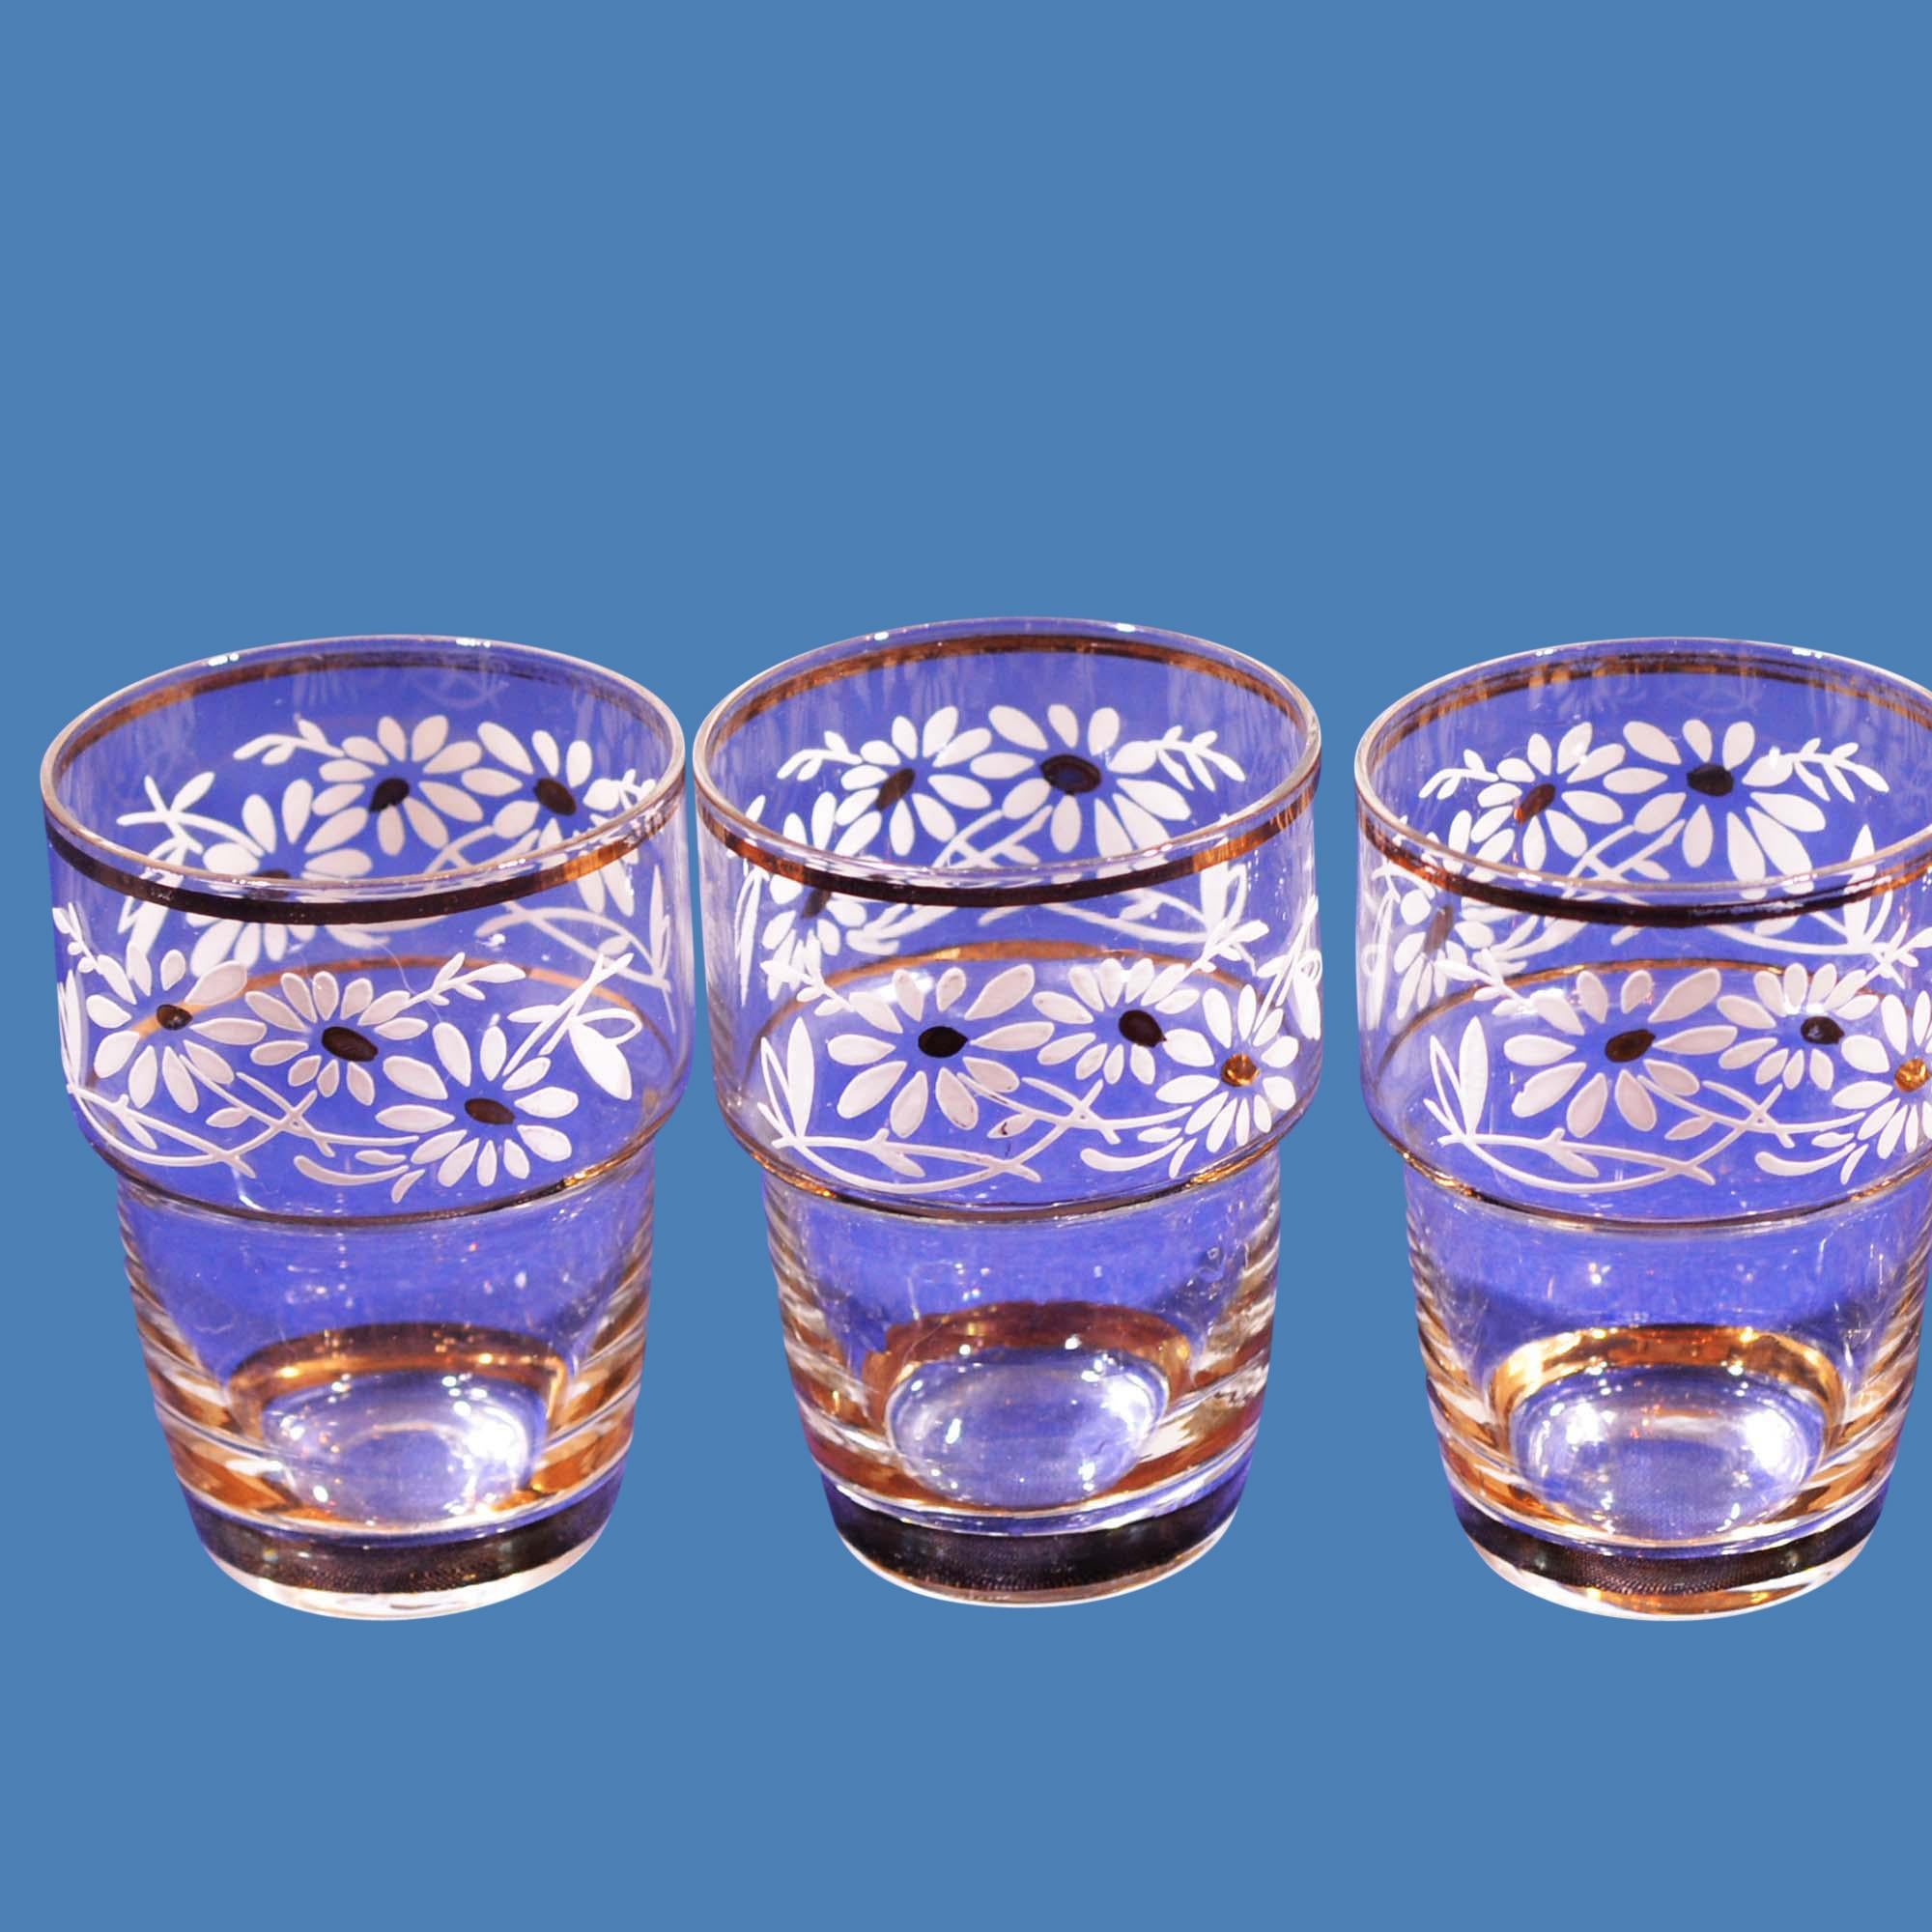 International gift of the month set of six small liquor glasses are fine examples of hand blown Belgium glass with hand painted floral design and decorated with 24-karat gold.